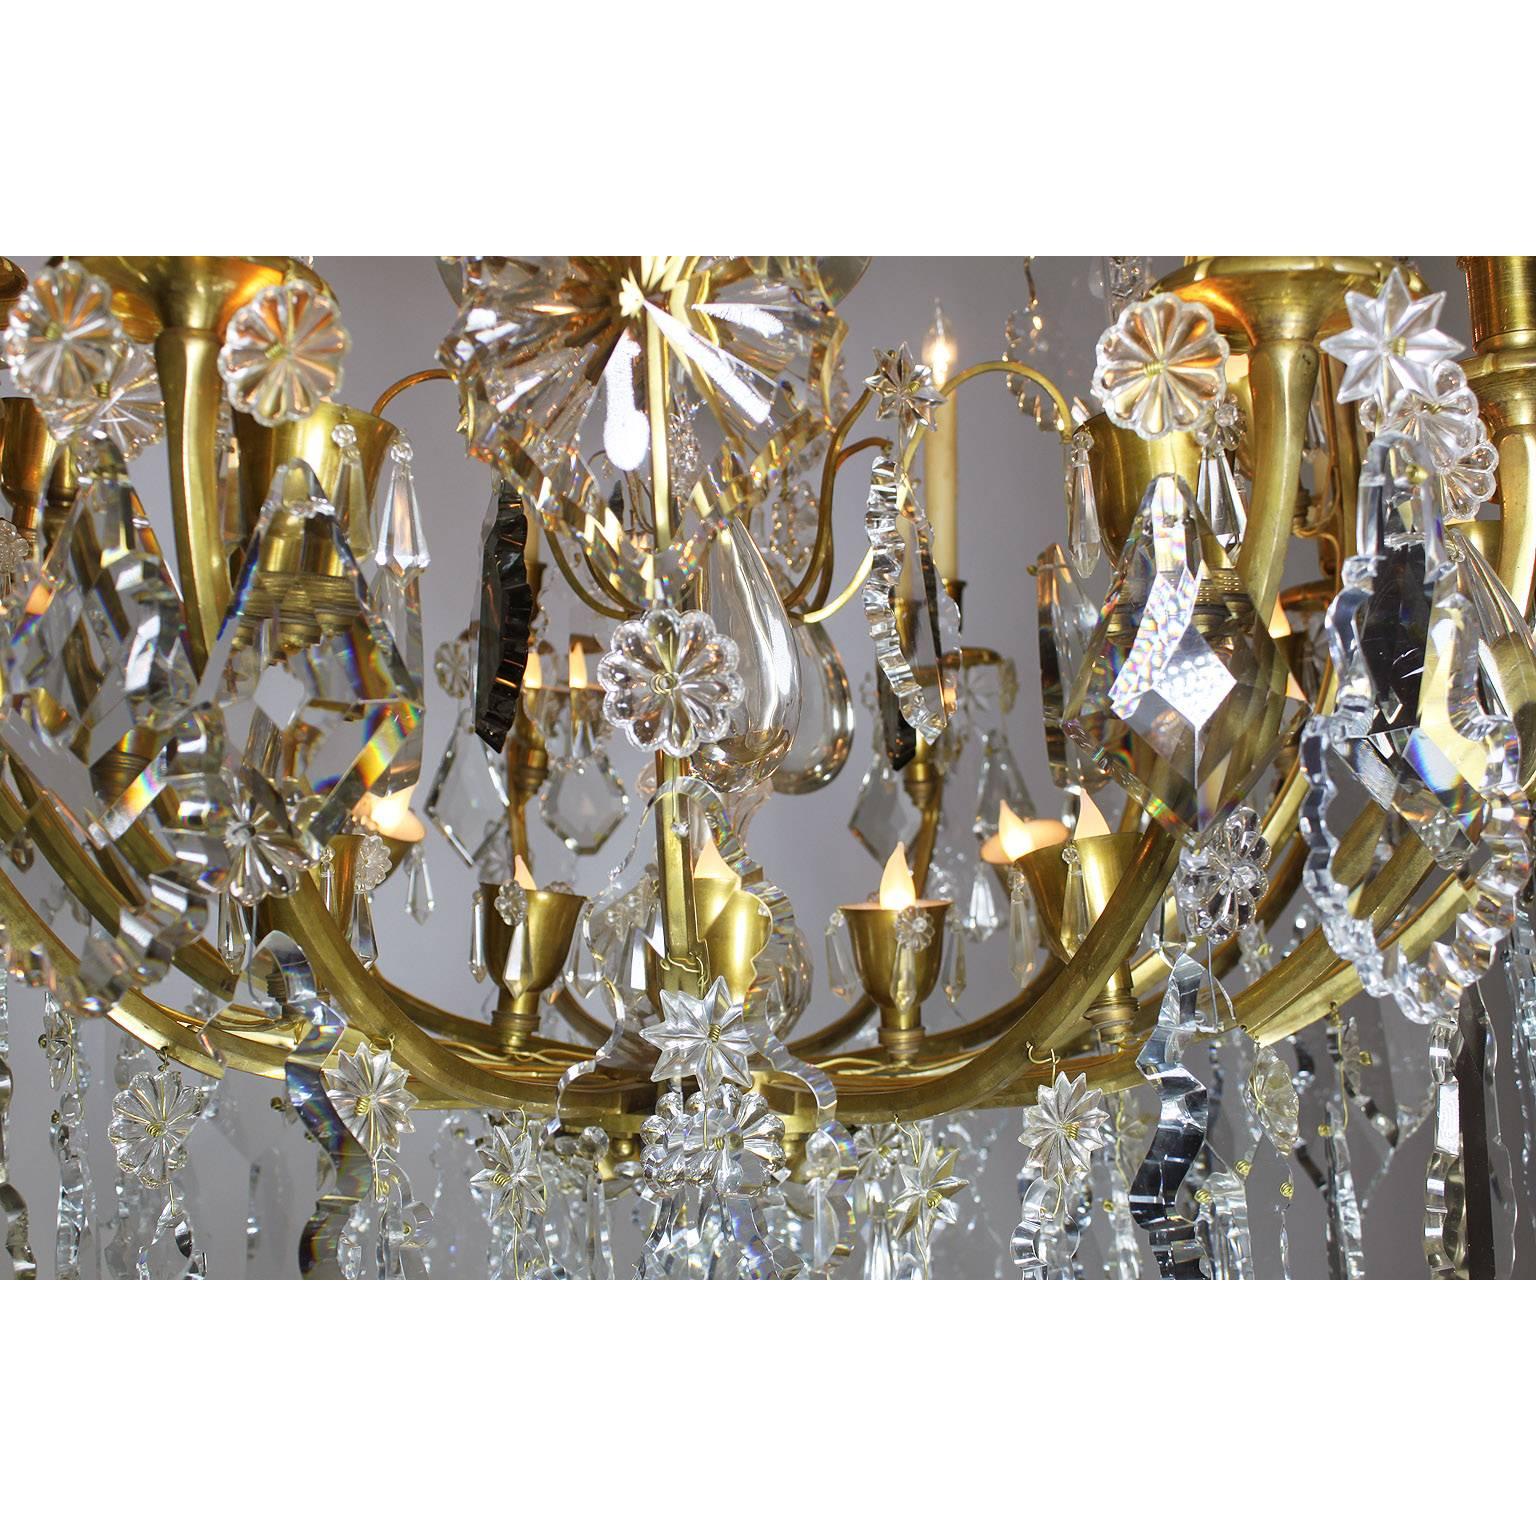 French 19th Century Louis XV Style Gilt-Bronze and Crystal Chandelier For Sale 2